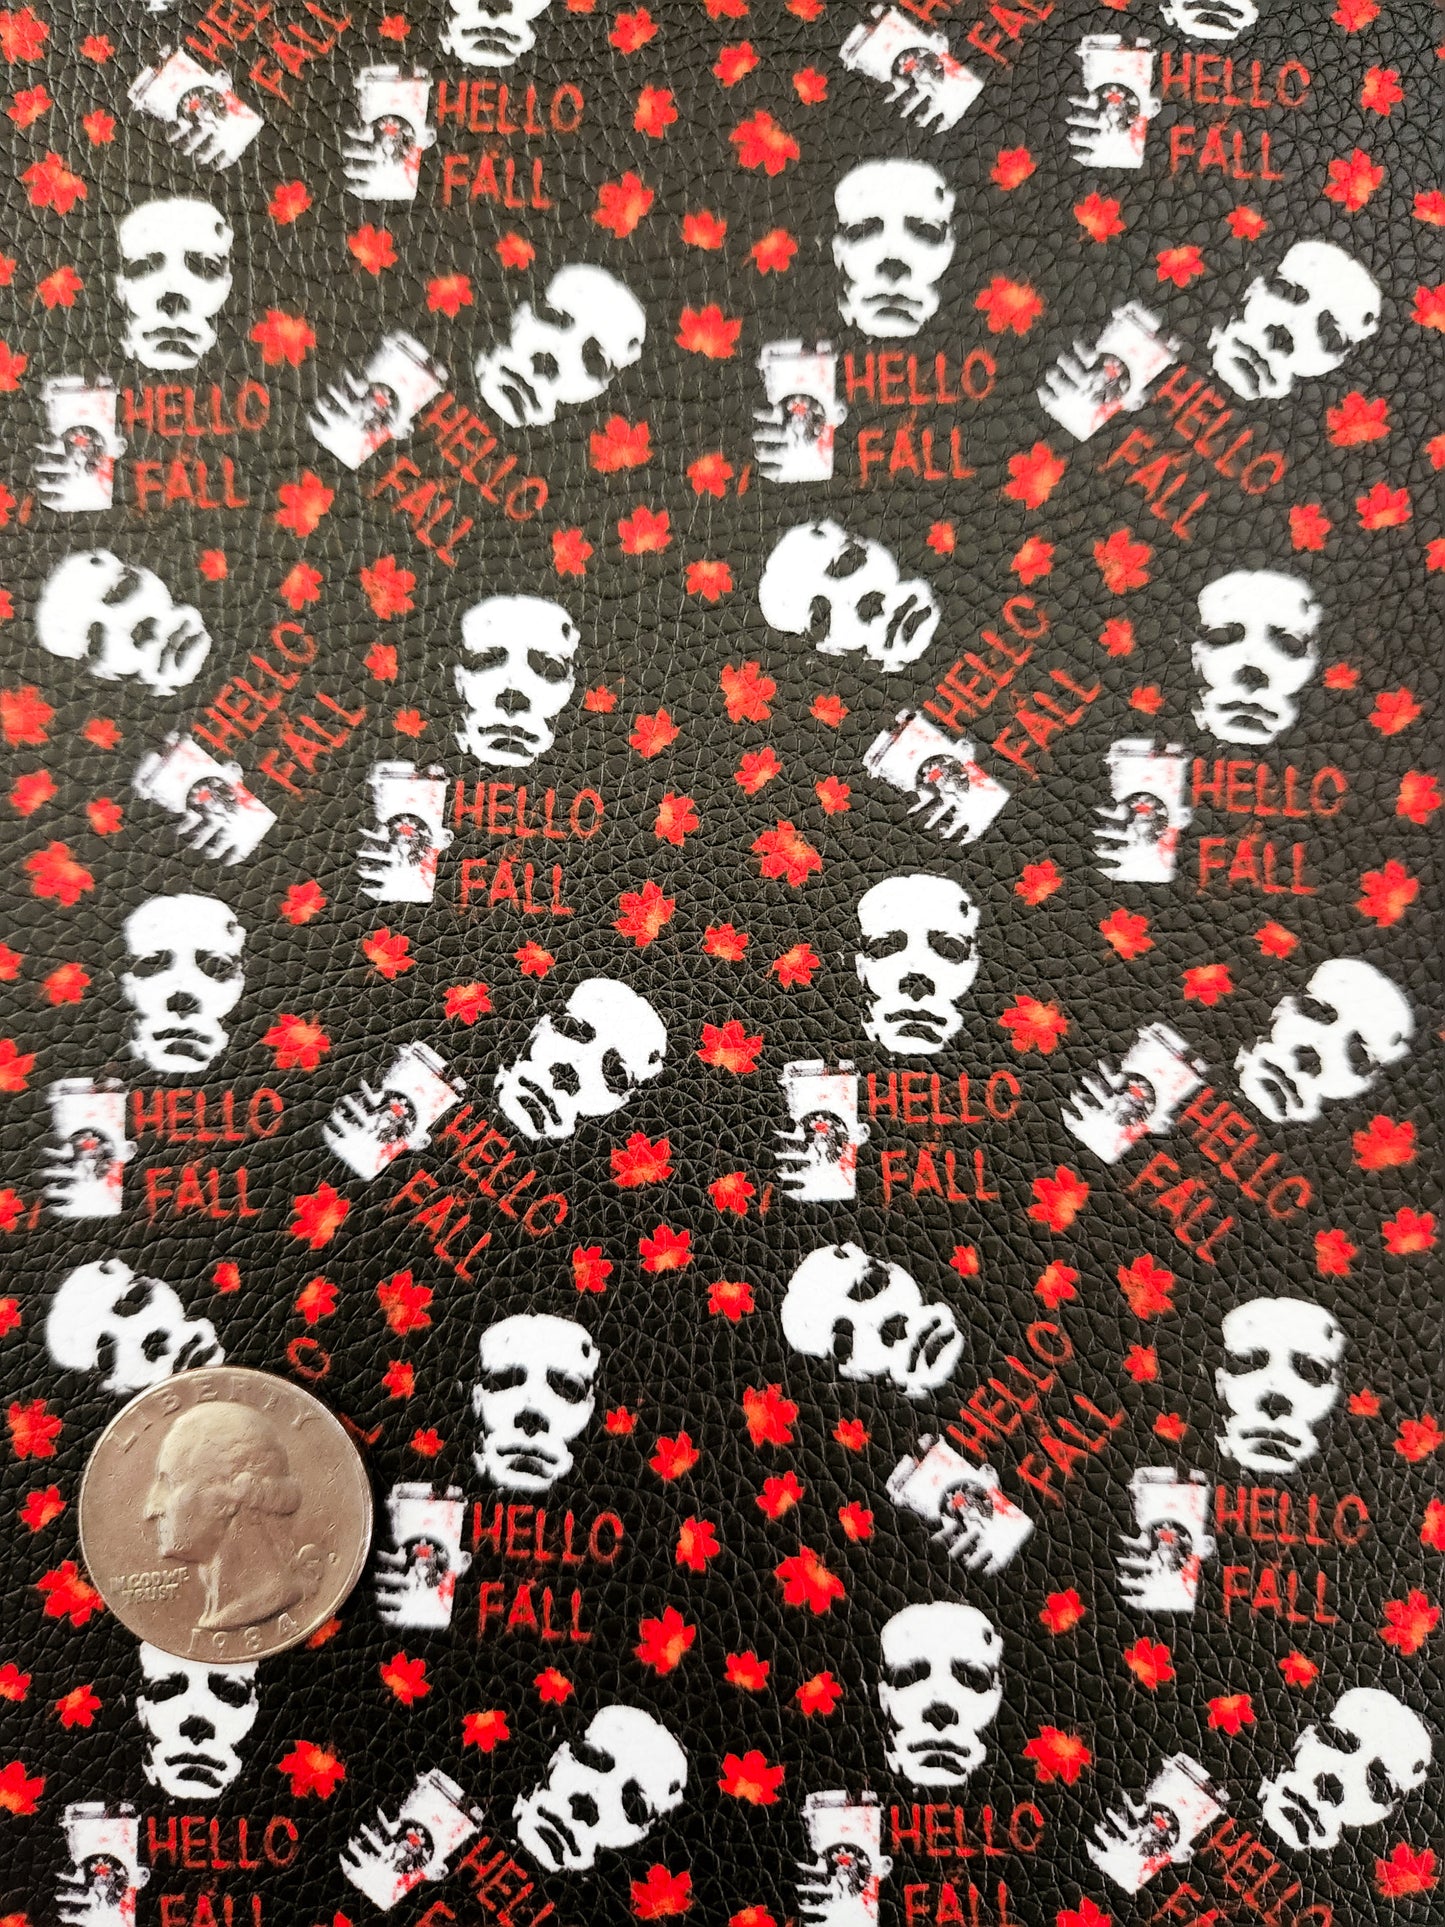 Hello Fall 9x12 faux leather sheet